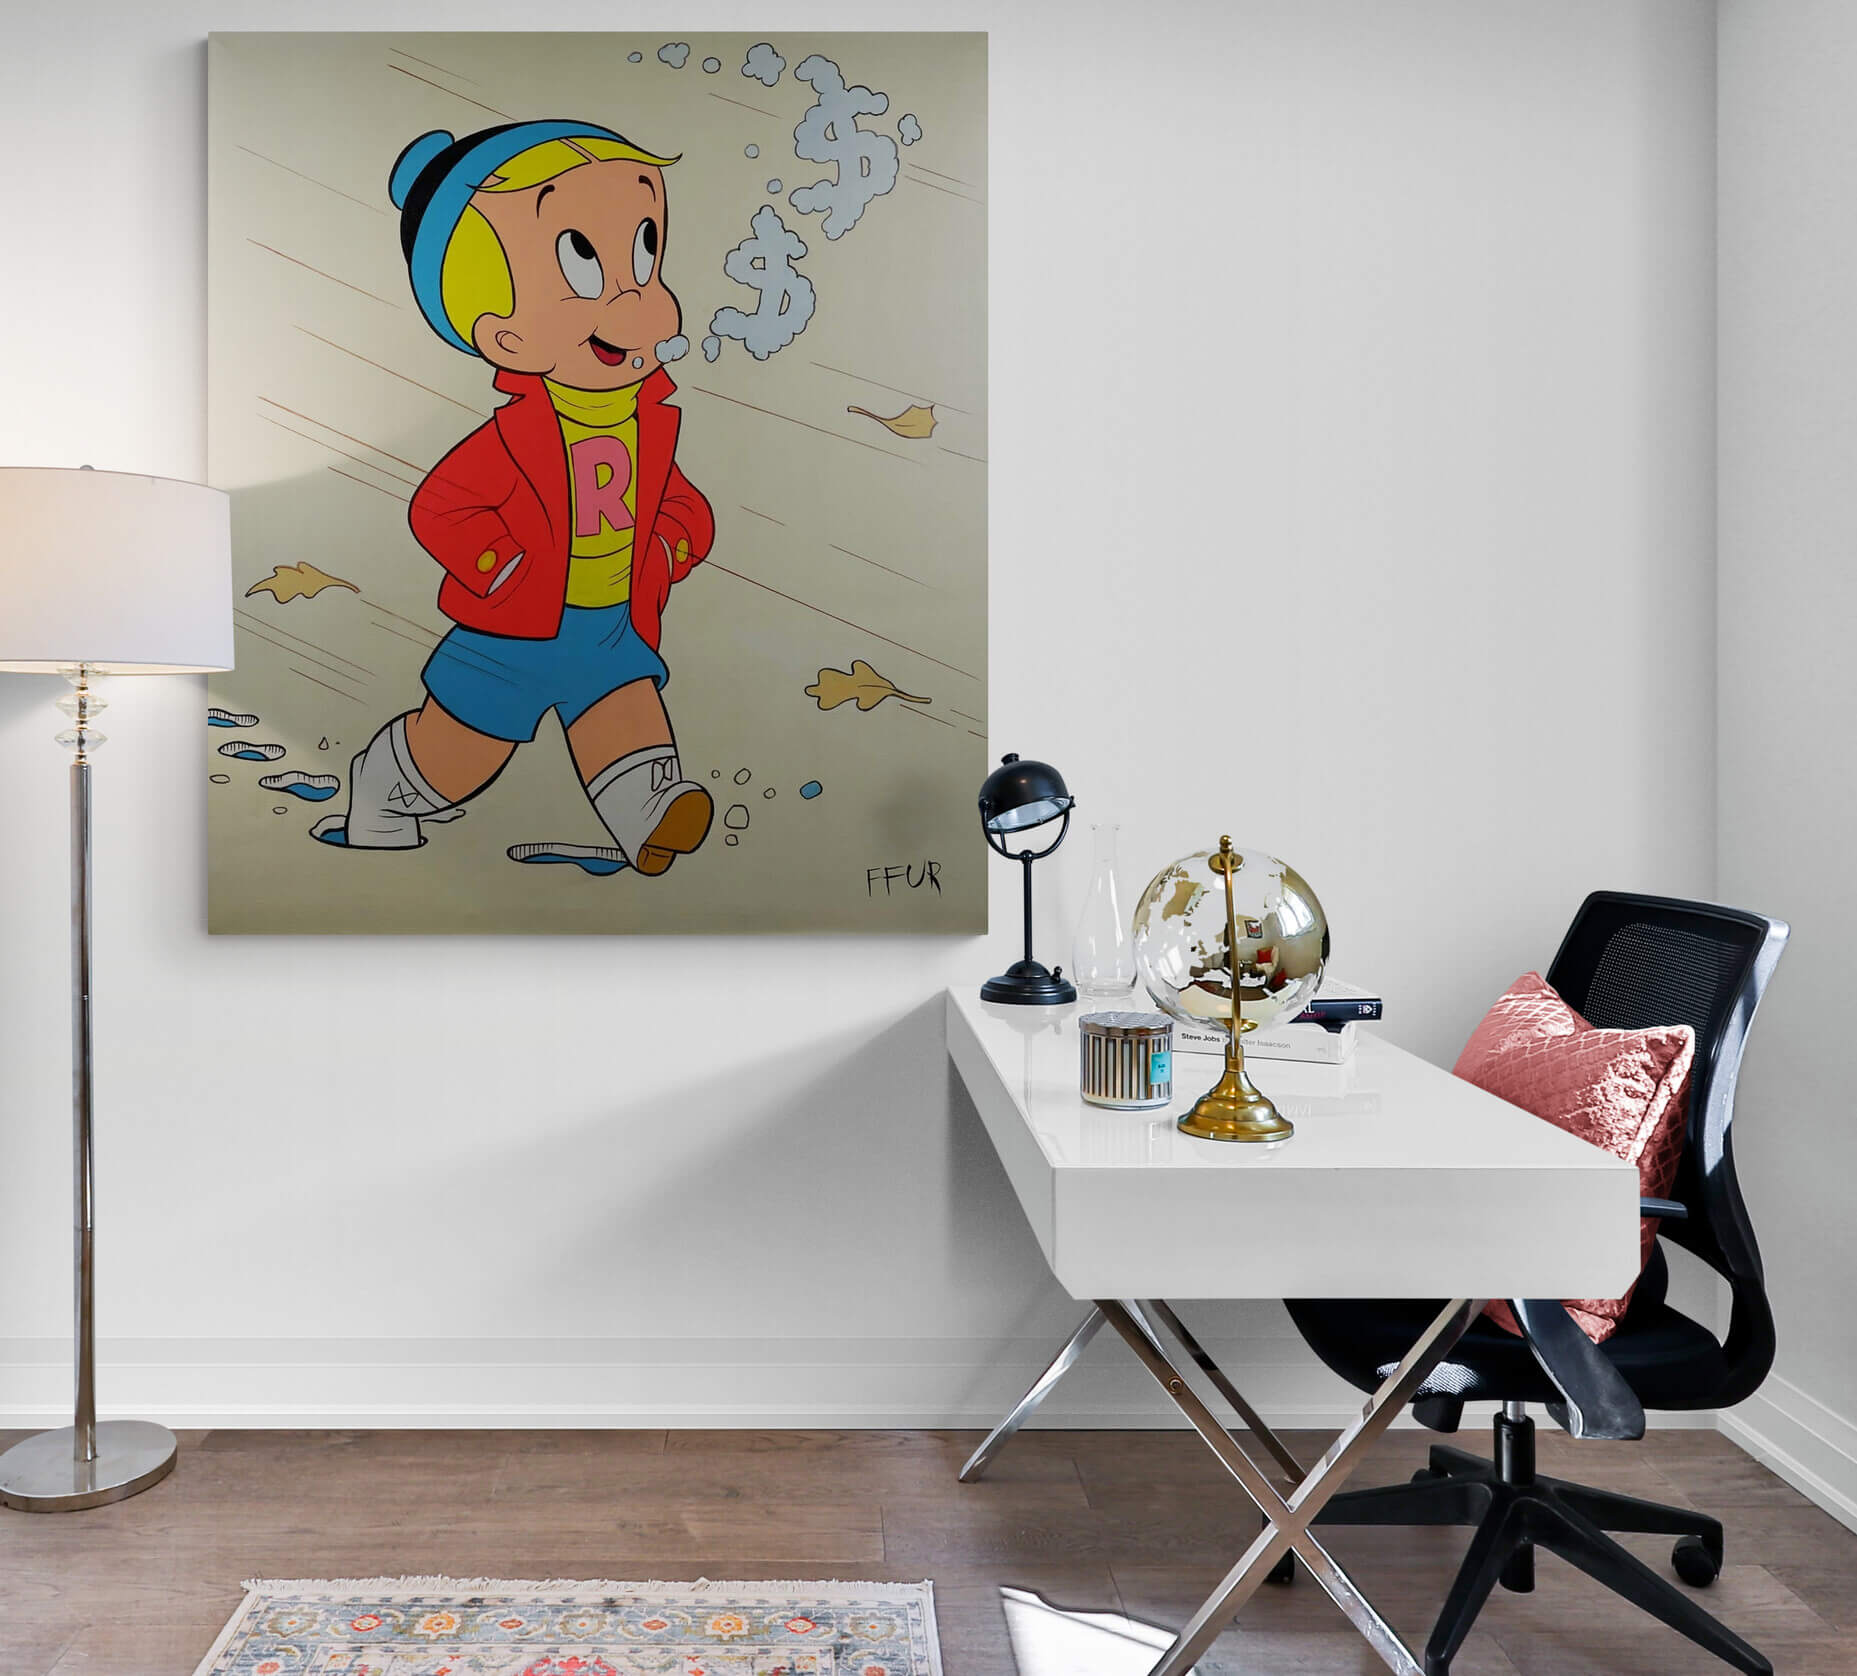 Large Canvas Art "Cool Walk" by Artist: This eye-catching piece of artwork features a stylized figure in motion against a bright, abstract background. The large size of the canvas makes it perfect for creating a bold focal point in any room by FURR